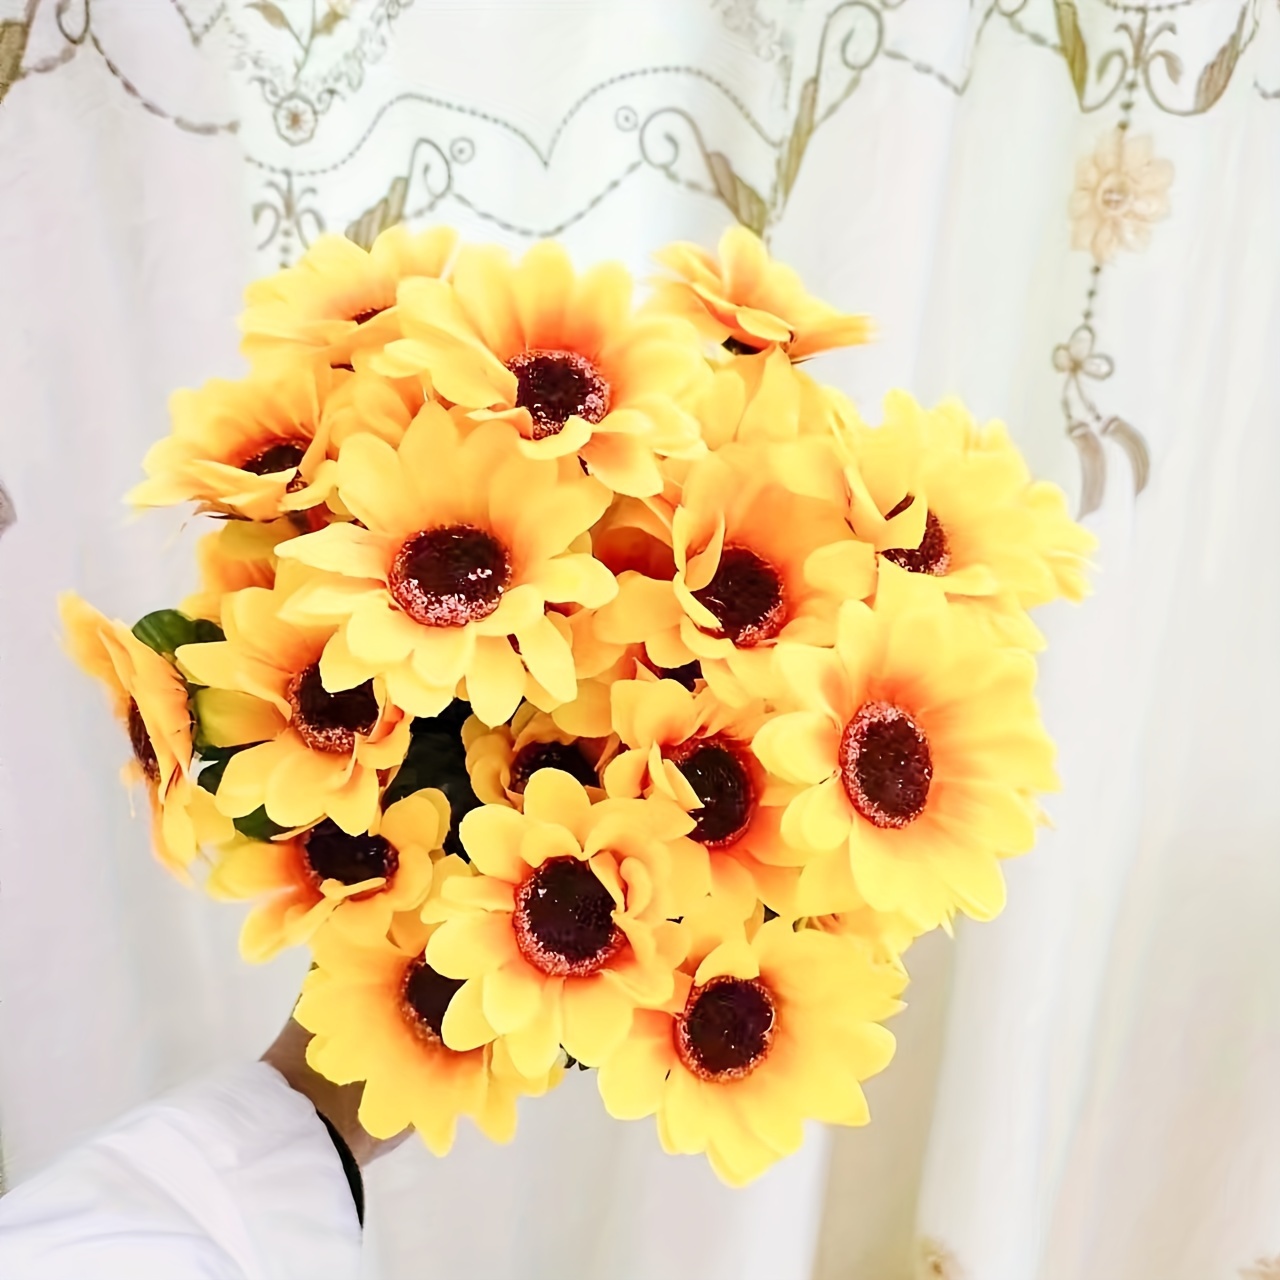 Giant Sunflowers Artificial Flowers 7 Forked Sunflowers 2 Bunch Sunflowers